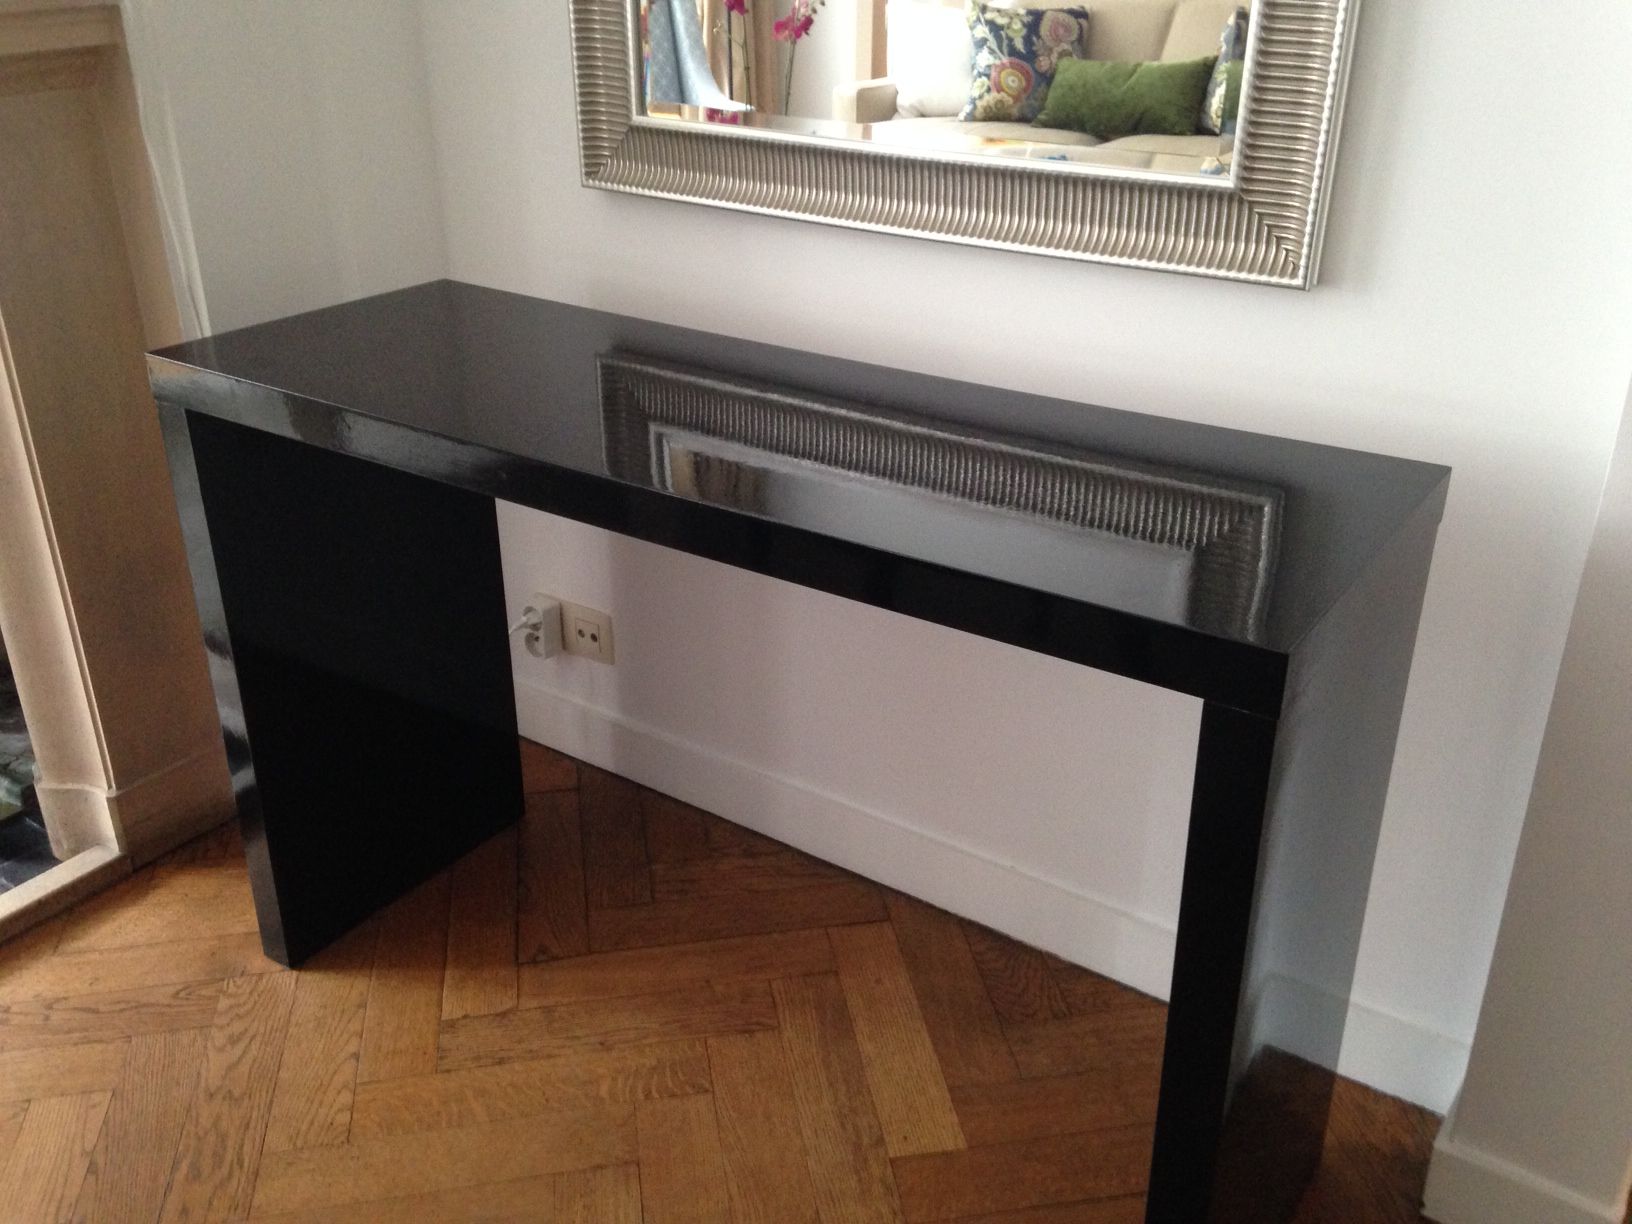 Newest 2 Piece Modern Nesting Console Tables Within The Console Tables Ikea For Stylish And Functional Storage (View 5 of 10)